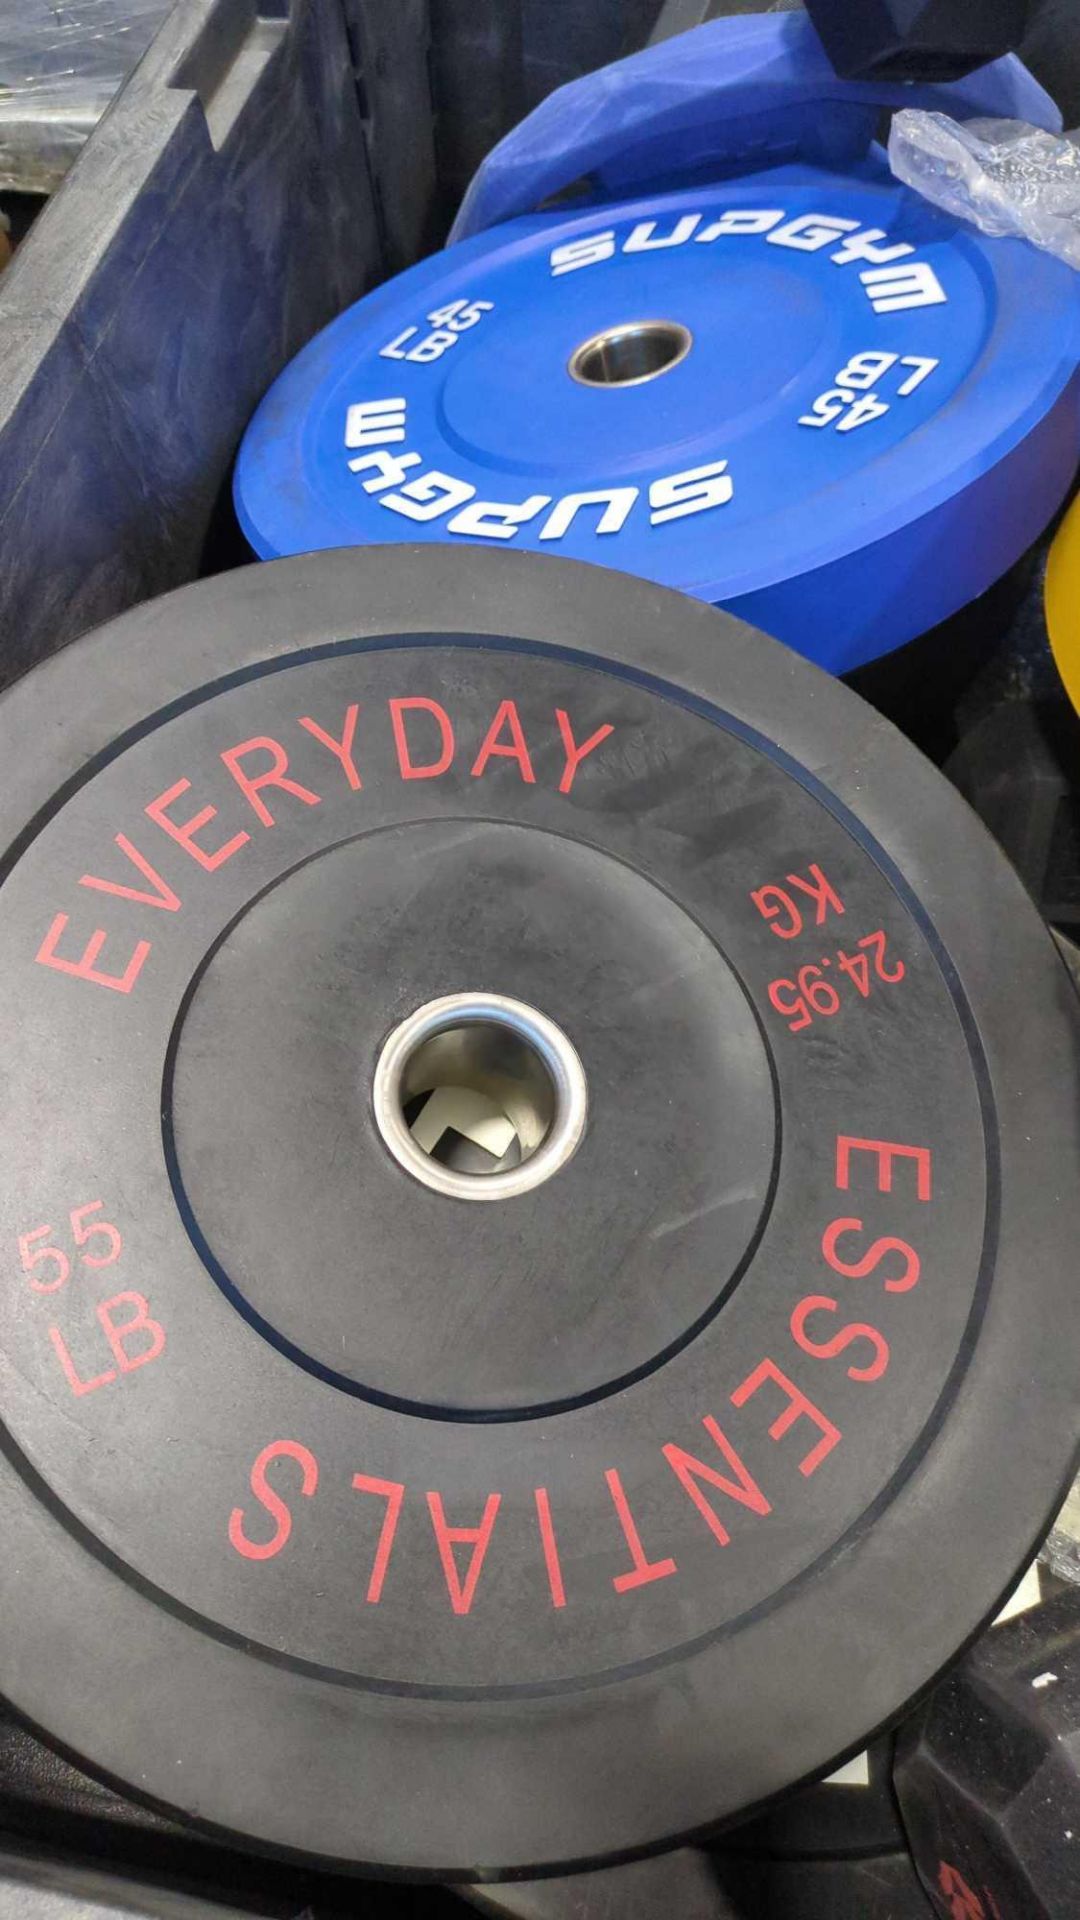 sleeve of weights, barbells and plates